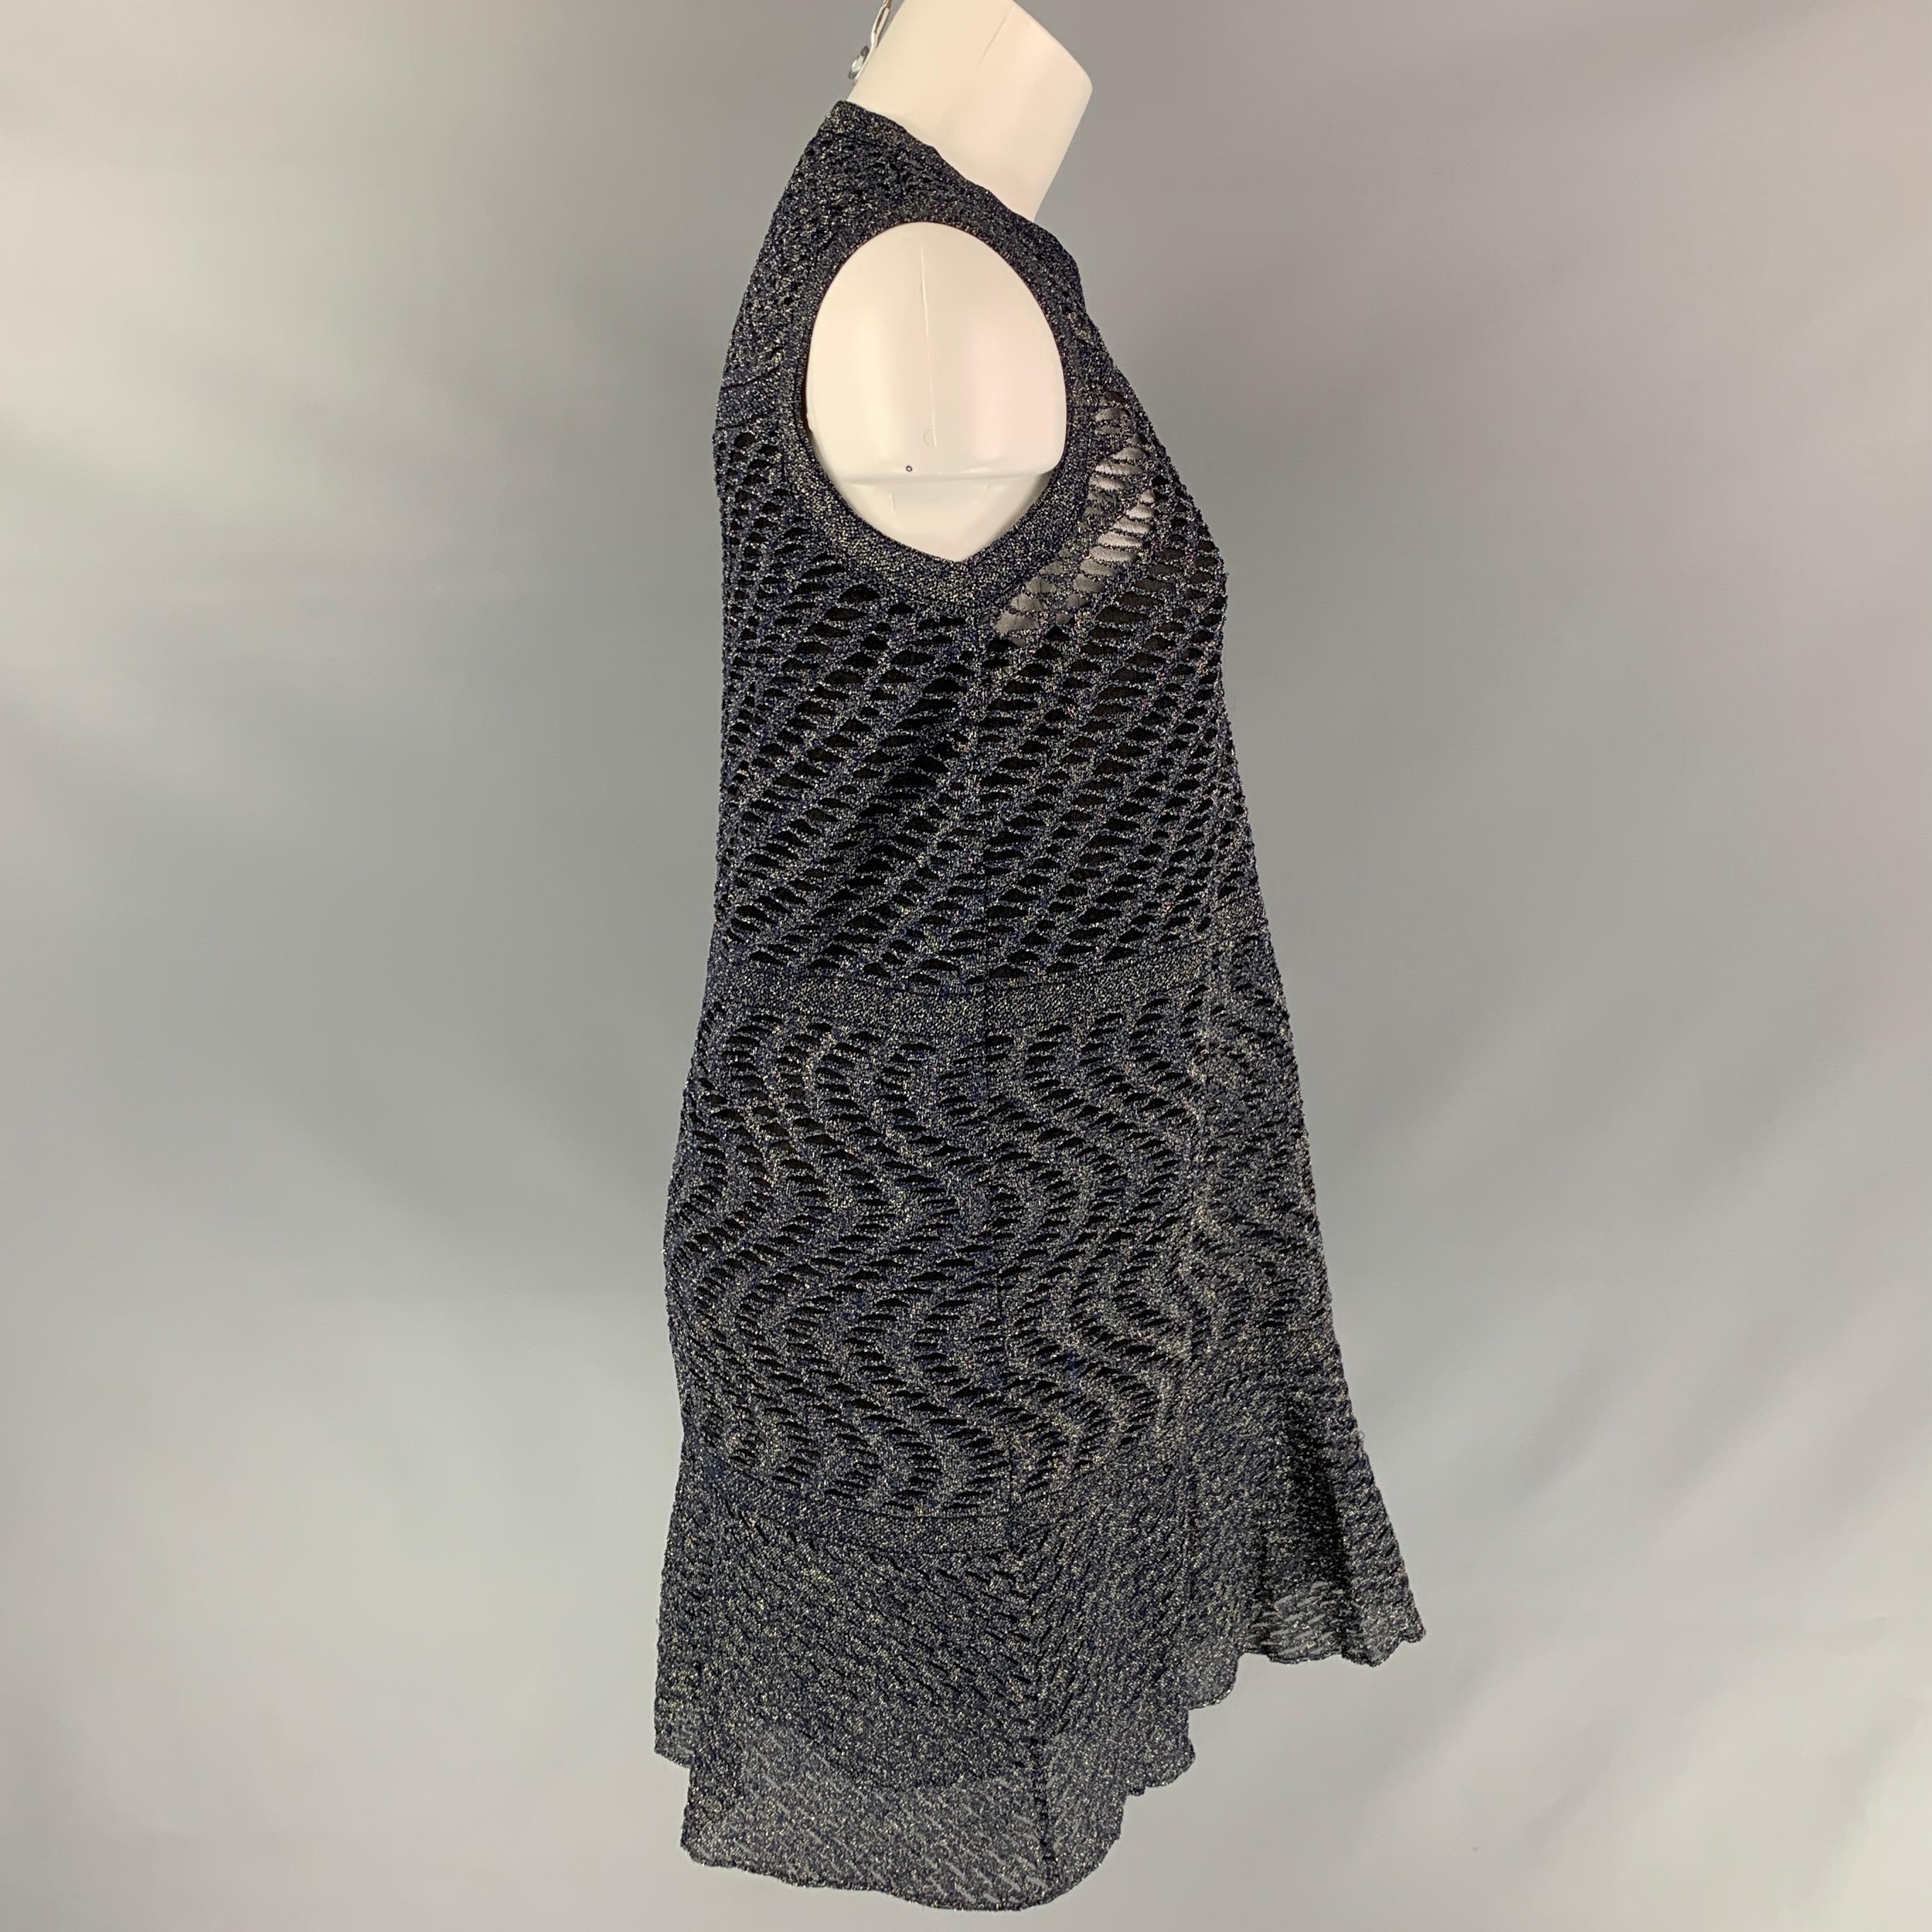 M MISSONI dress comes in a silver & black metallic knitted polyamide blend with a full slip liner featuring a sleeveless style, a-line, and a ruffled hem. Made in Italy. 
 

Very Good Pre-Owned Condition.
Marked: 42

Measurements:

Shoulder: 15